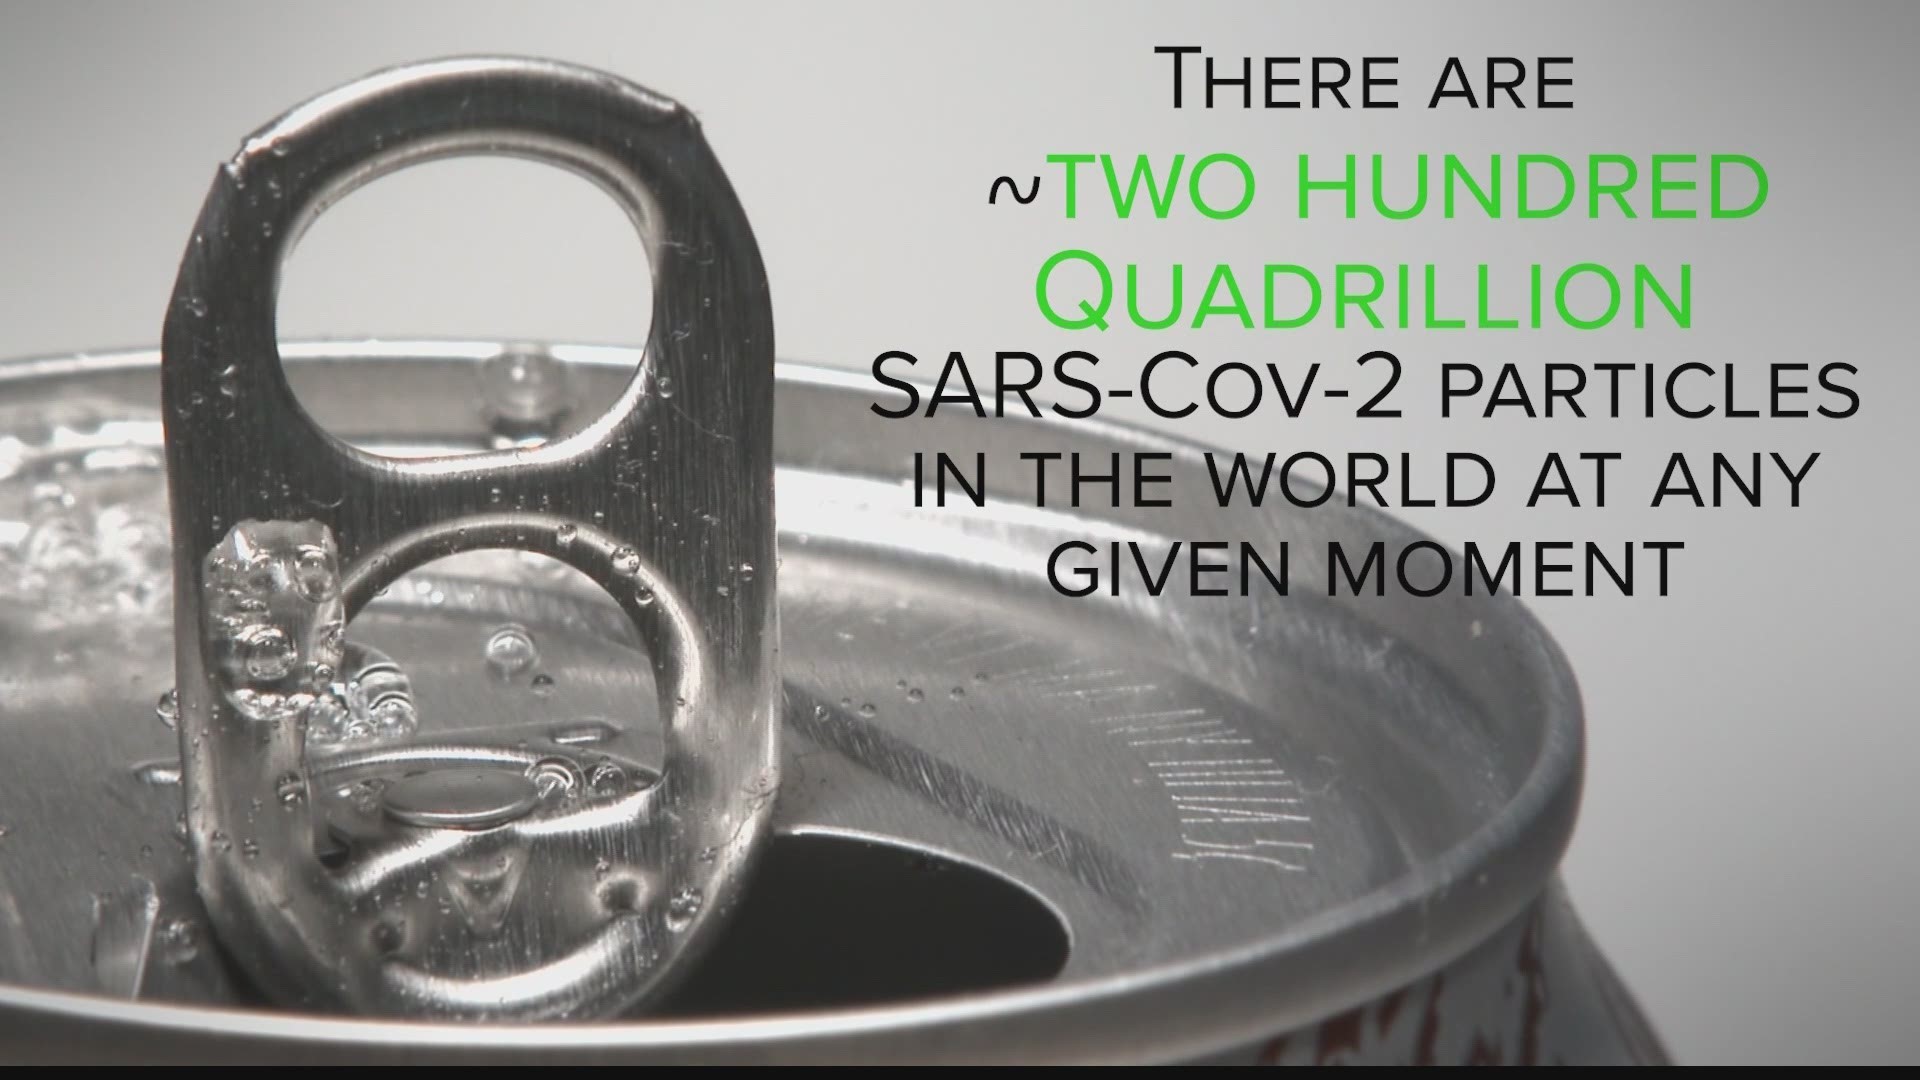 The VERIFY team looked into claims that all the COVID-19 particles in the world could fit into a can of soda.